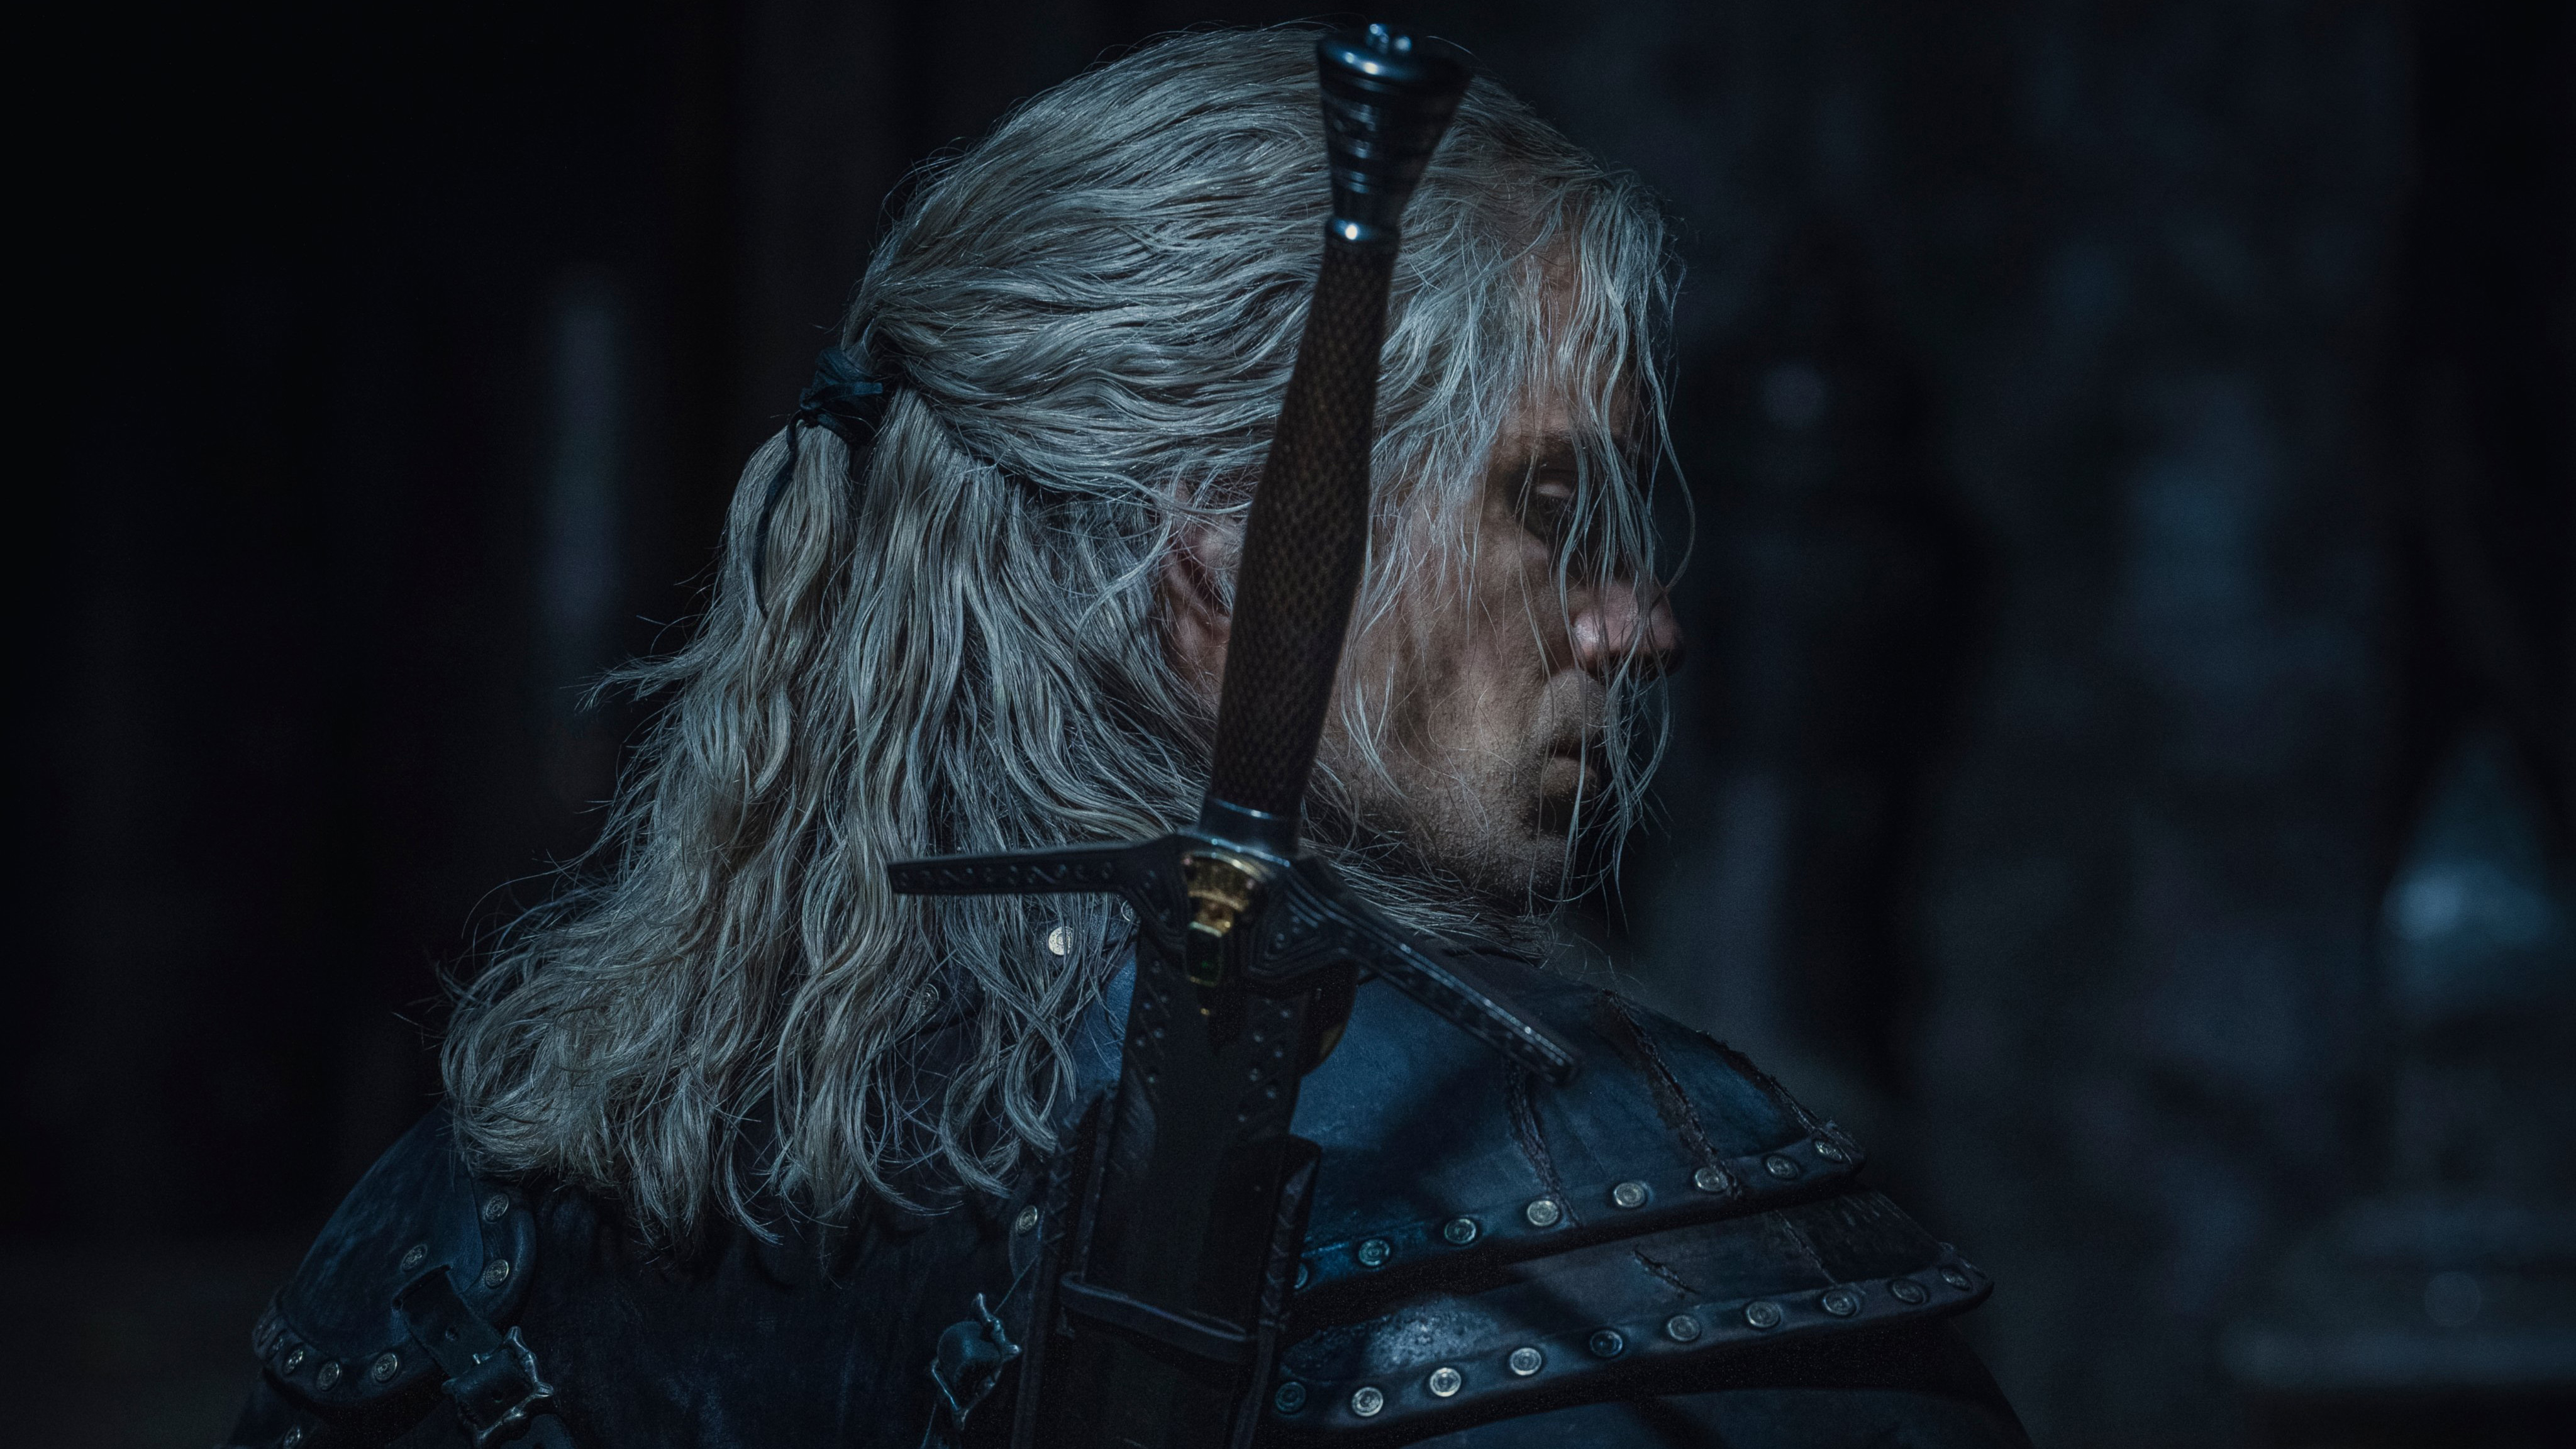 The Witcher Season 2 Release Date Cast Set Photos Trailer And What